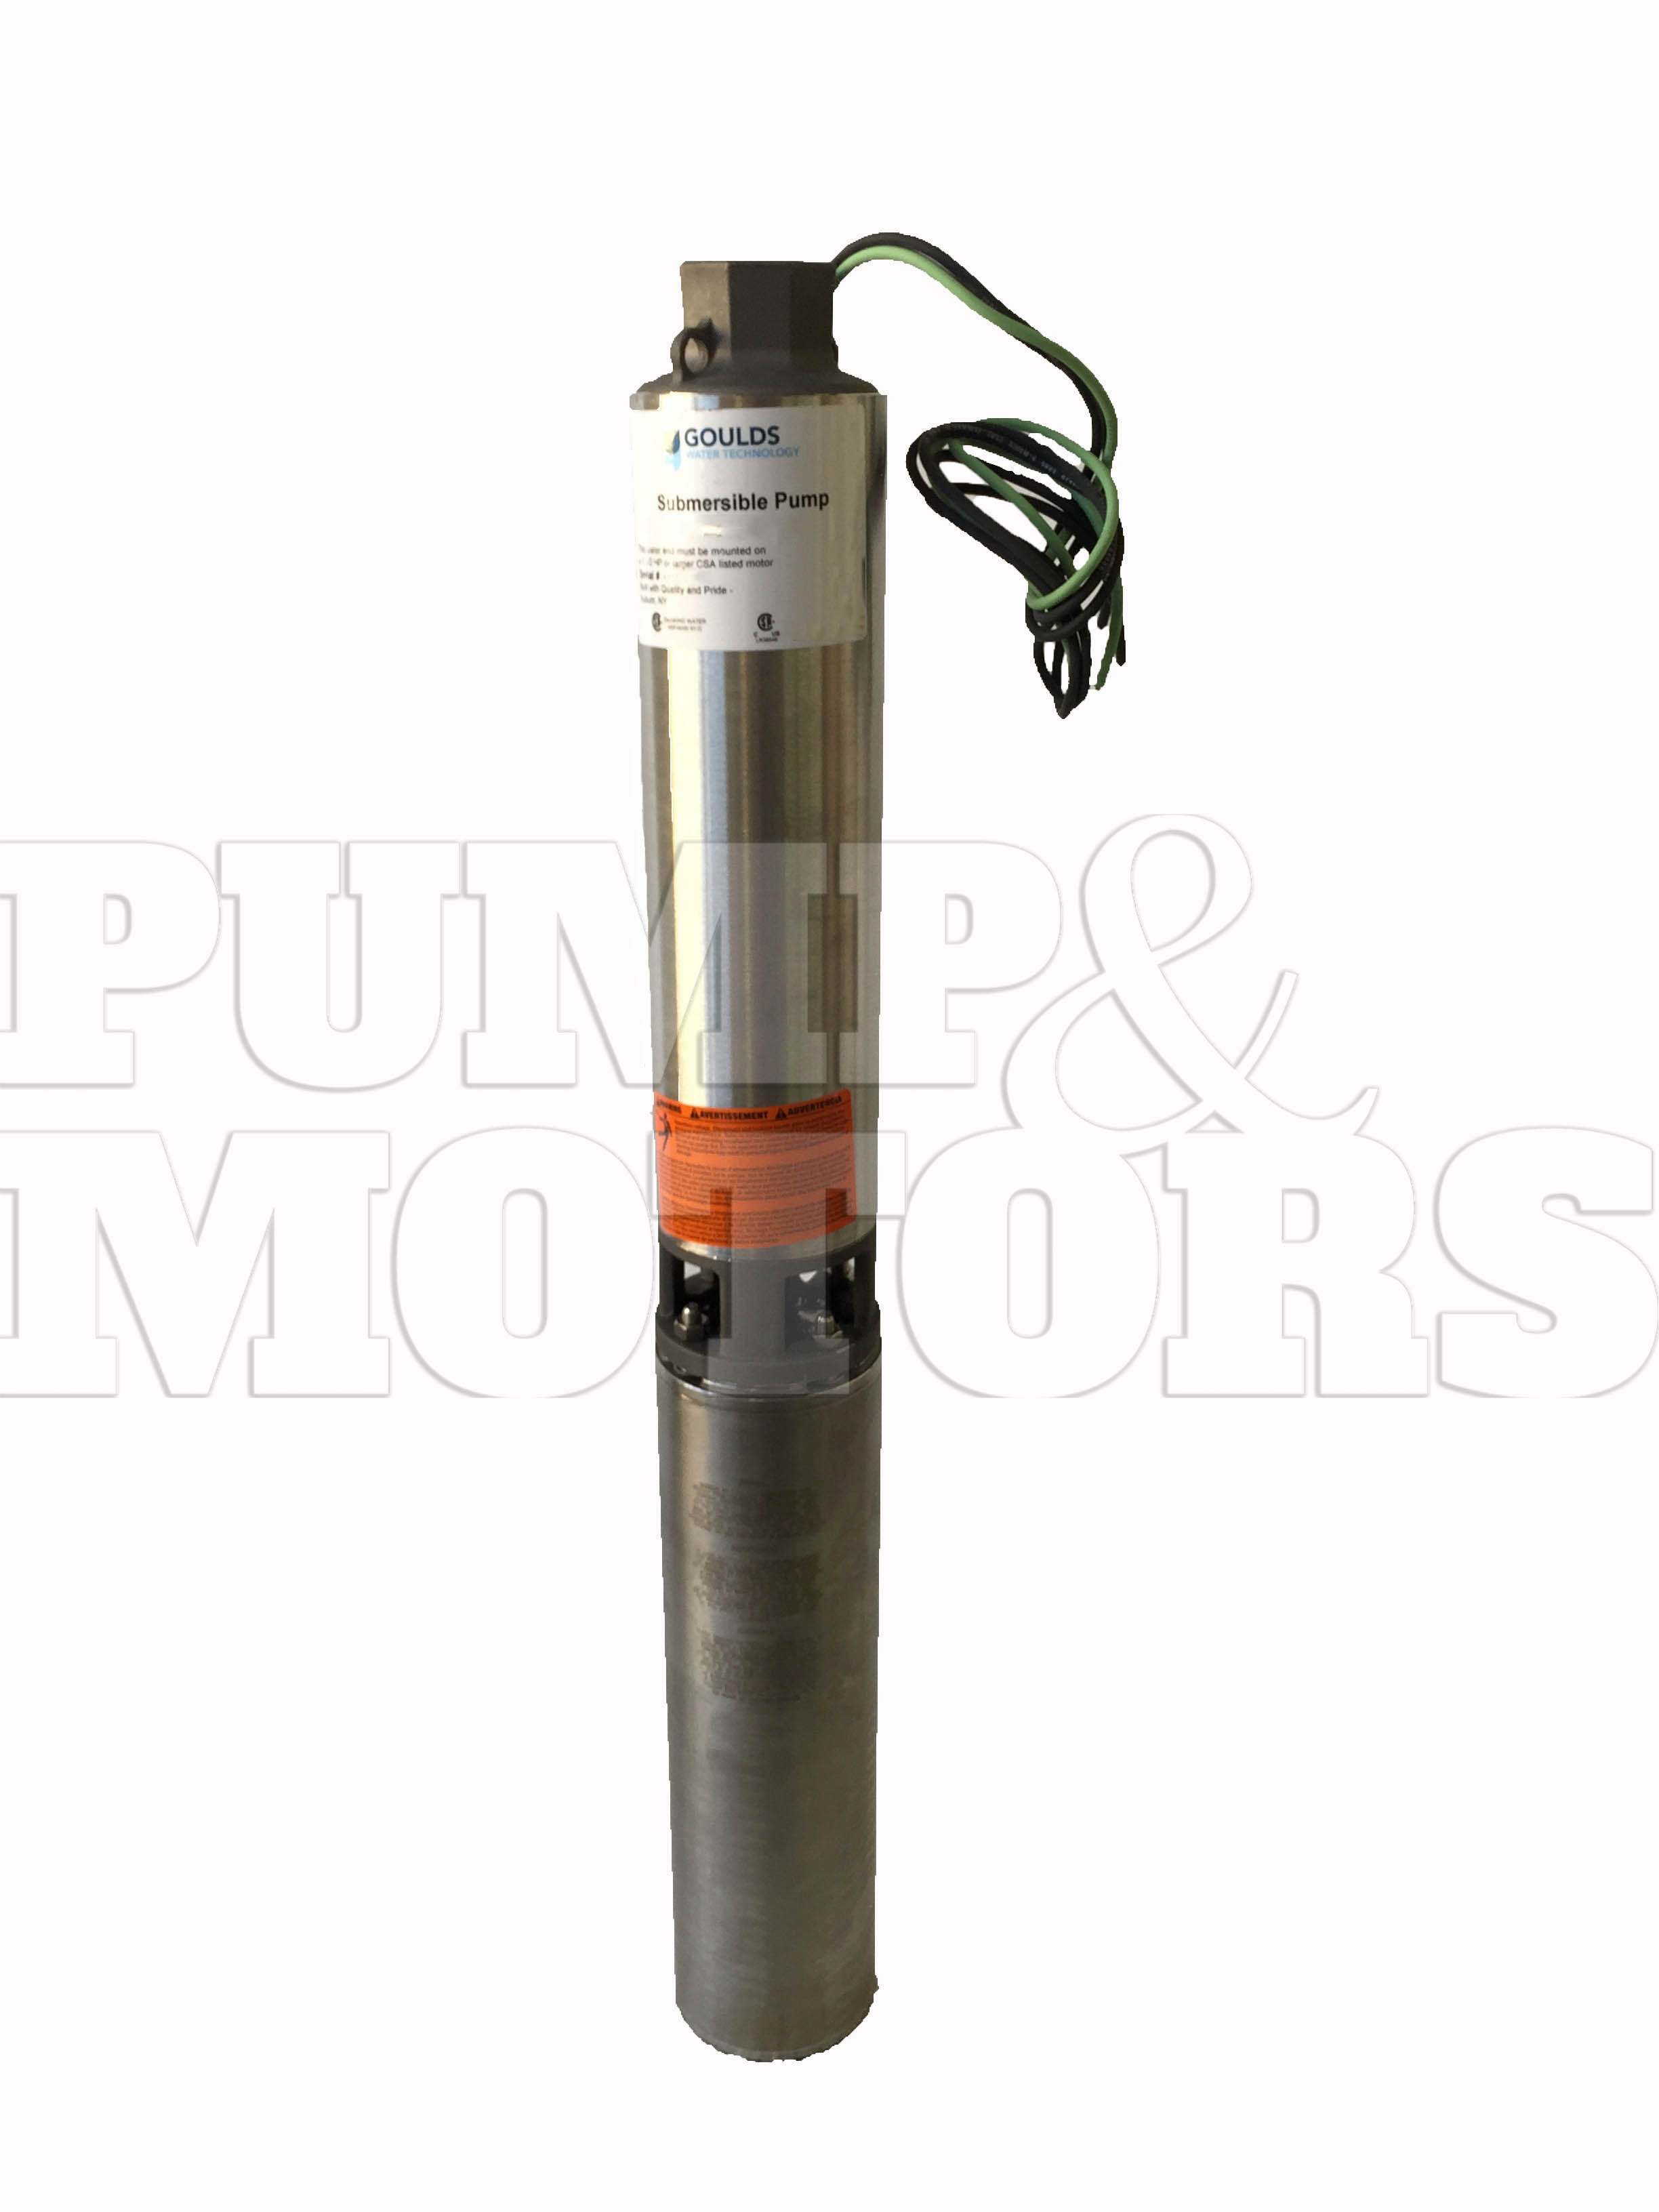 Goulds 25GS10422C 1 HP 230V 4" SUbmersible Water Well Pump 25GPM